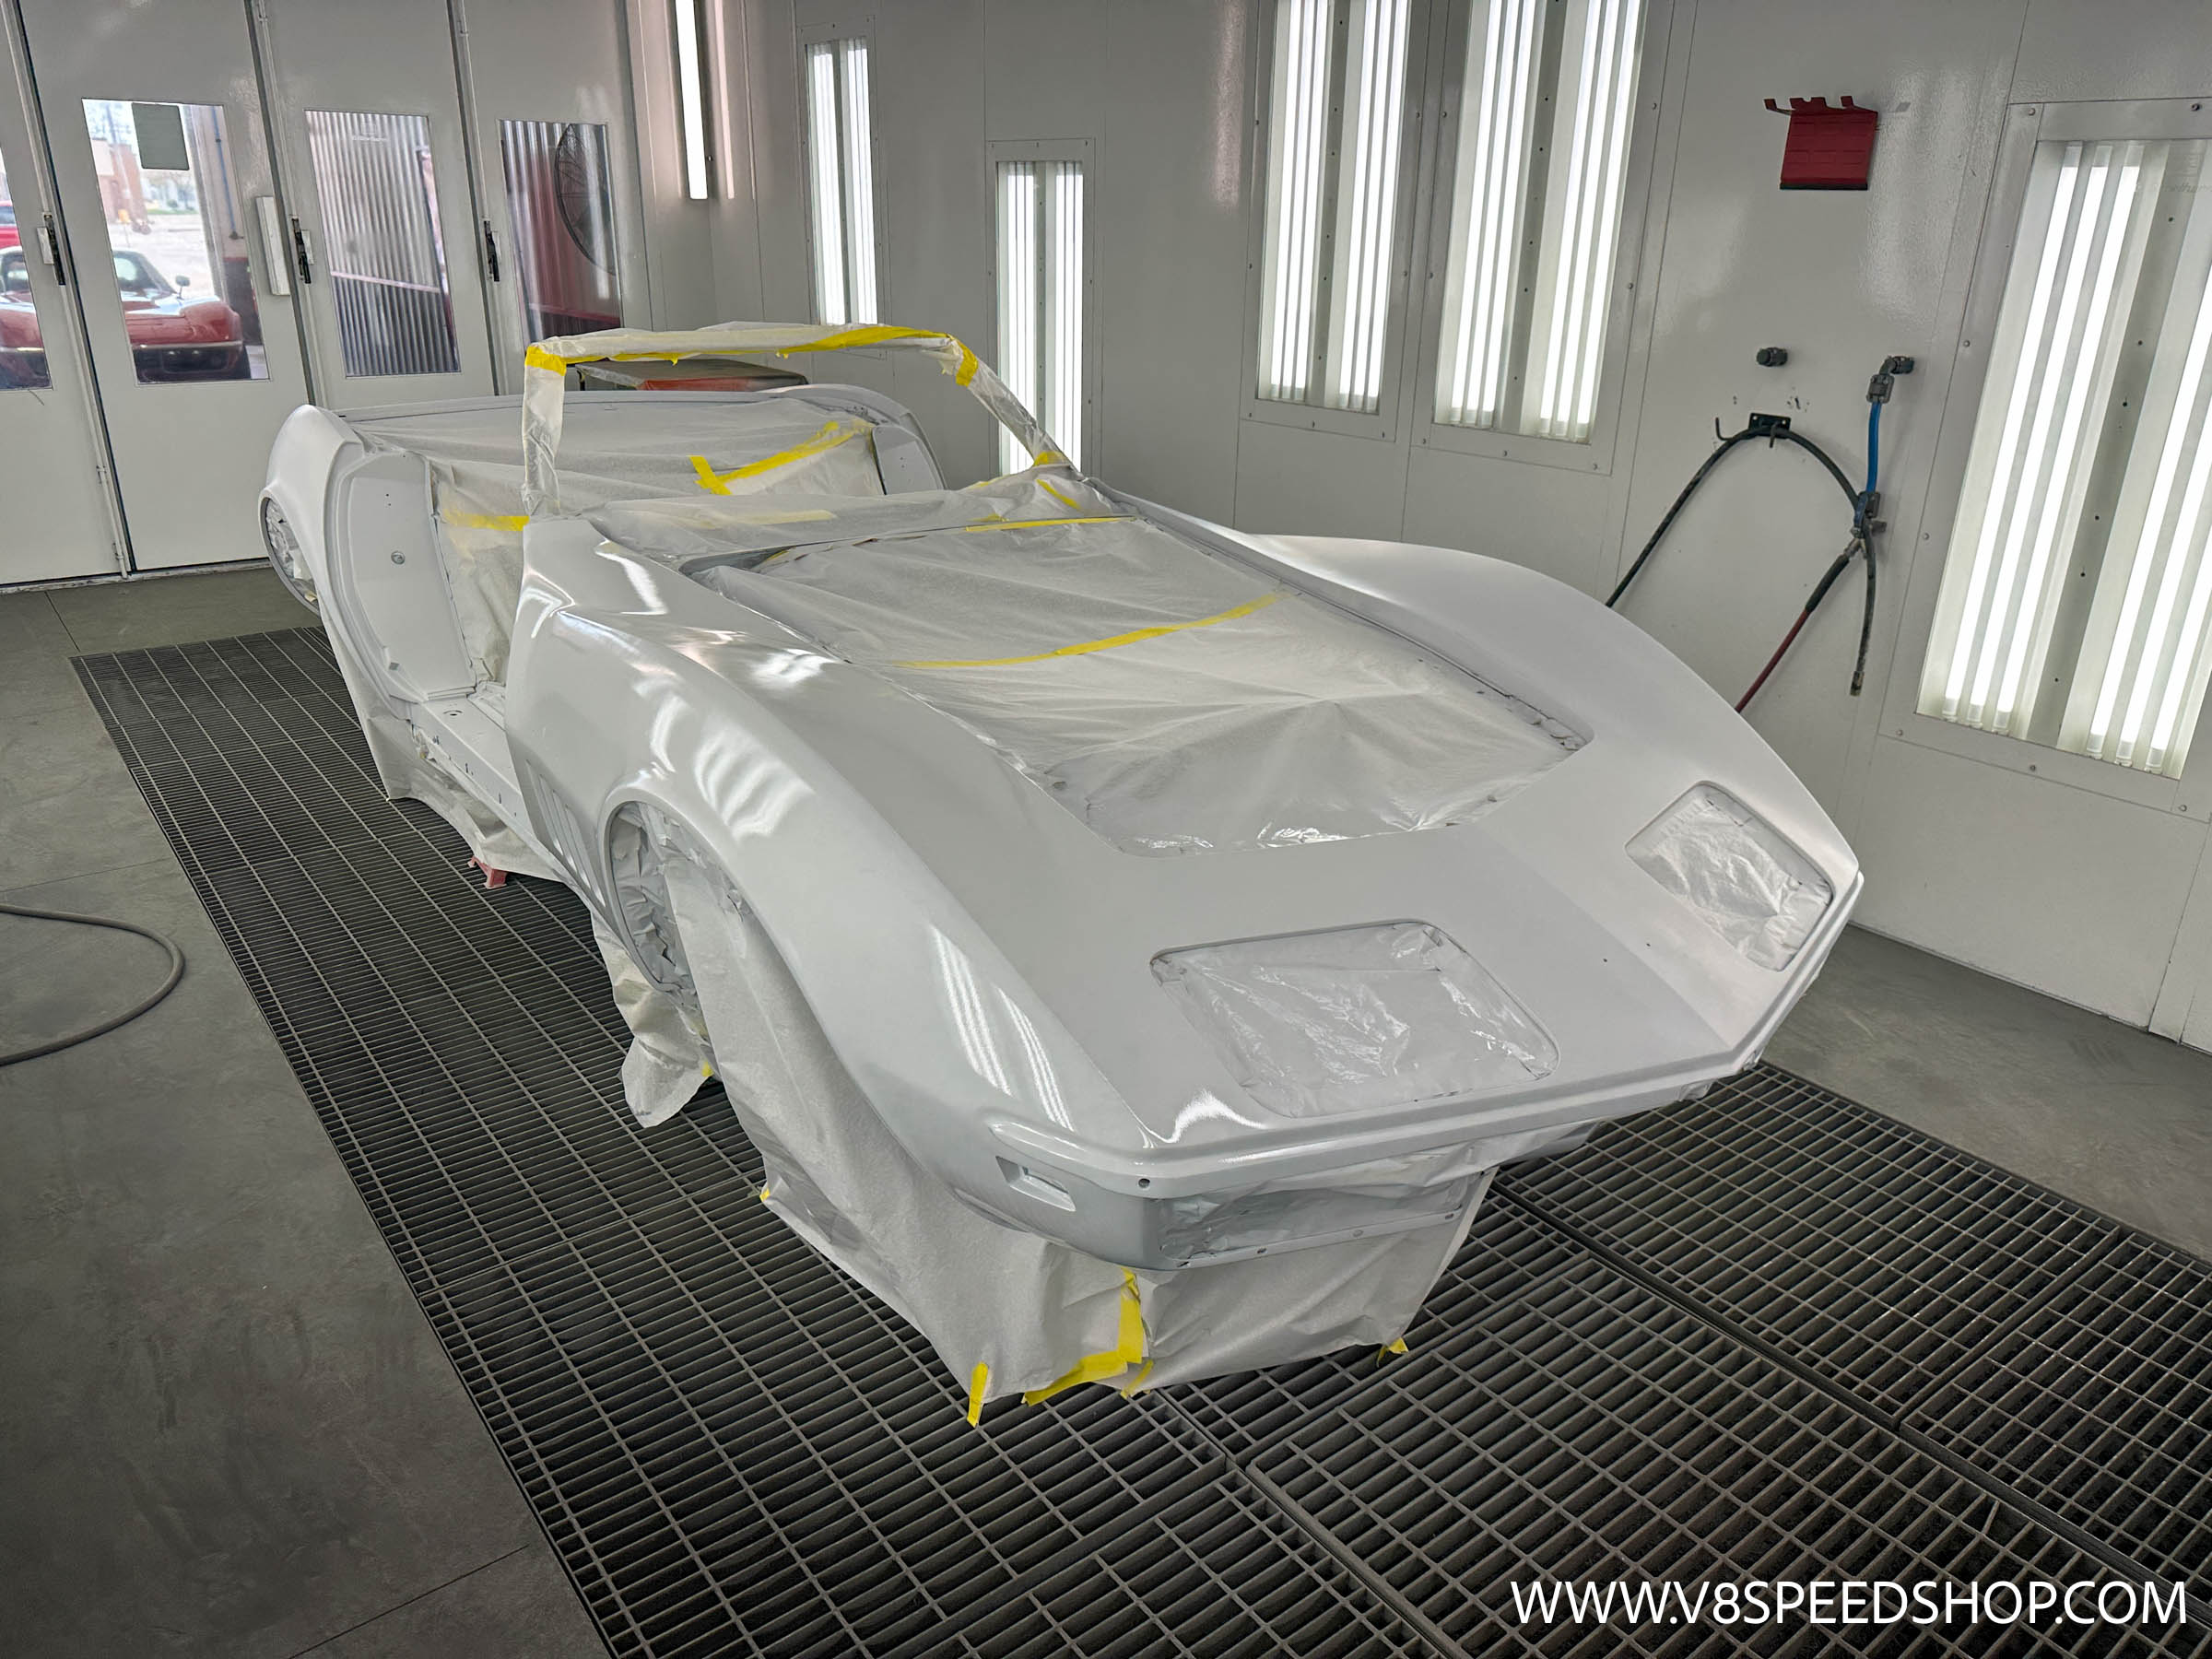 Primed For Perfection: The 1969 Corvette 427 Roadster Restoration at V8 Speed and Resto Shop